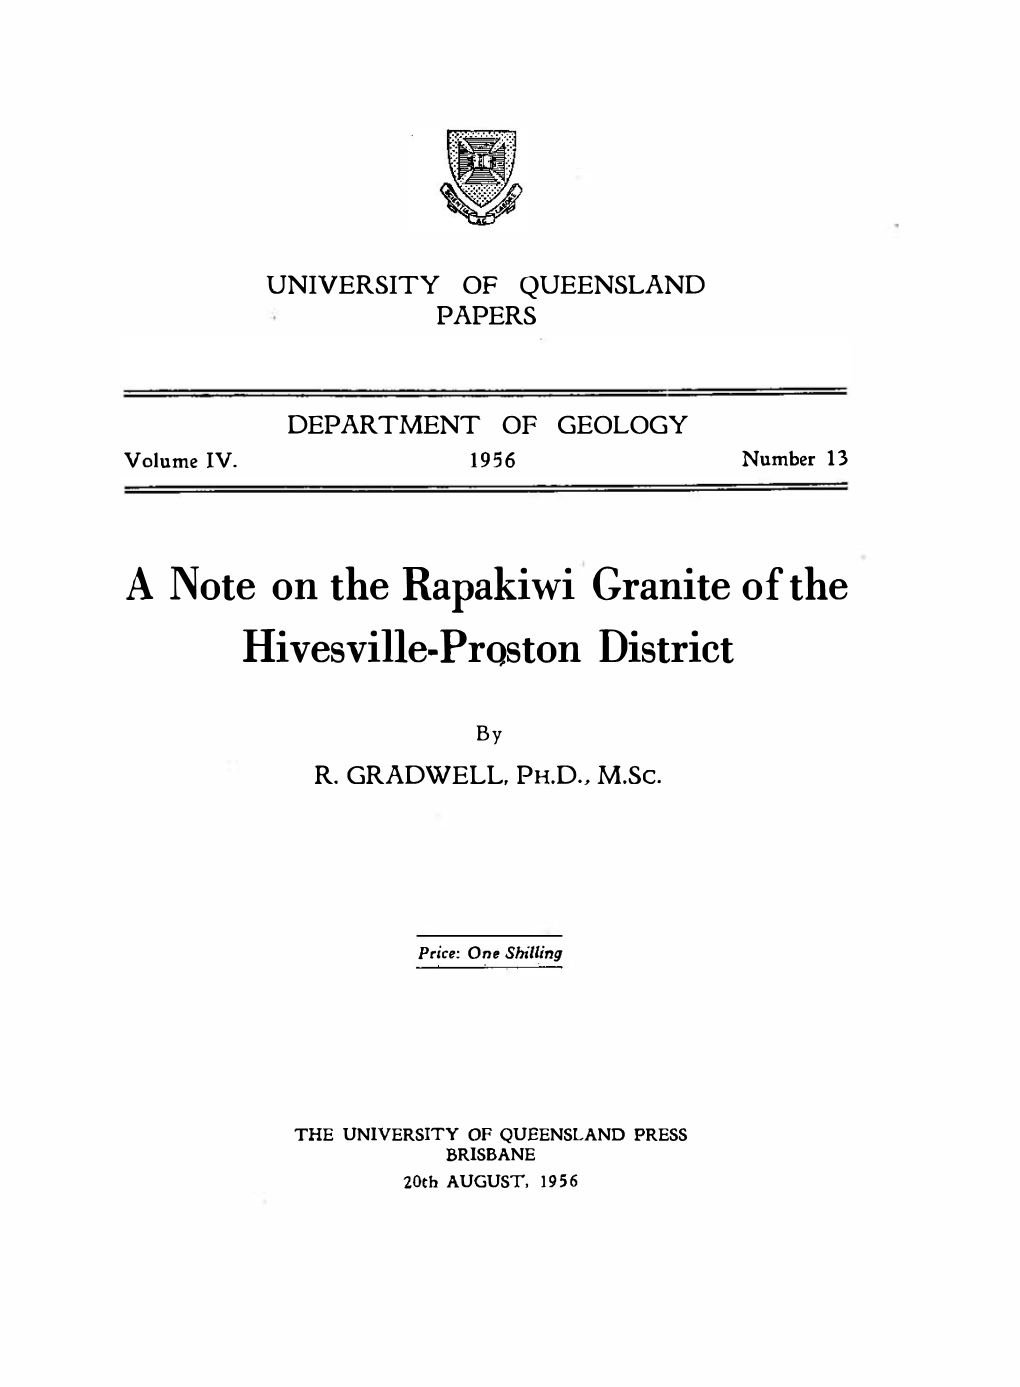 A Note on the Rapakiwi Granite of the Hives Ville-Pro..Ston District